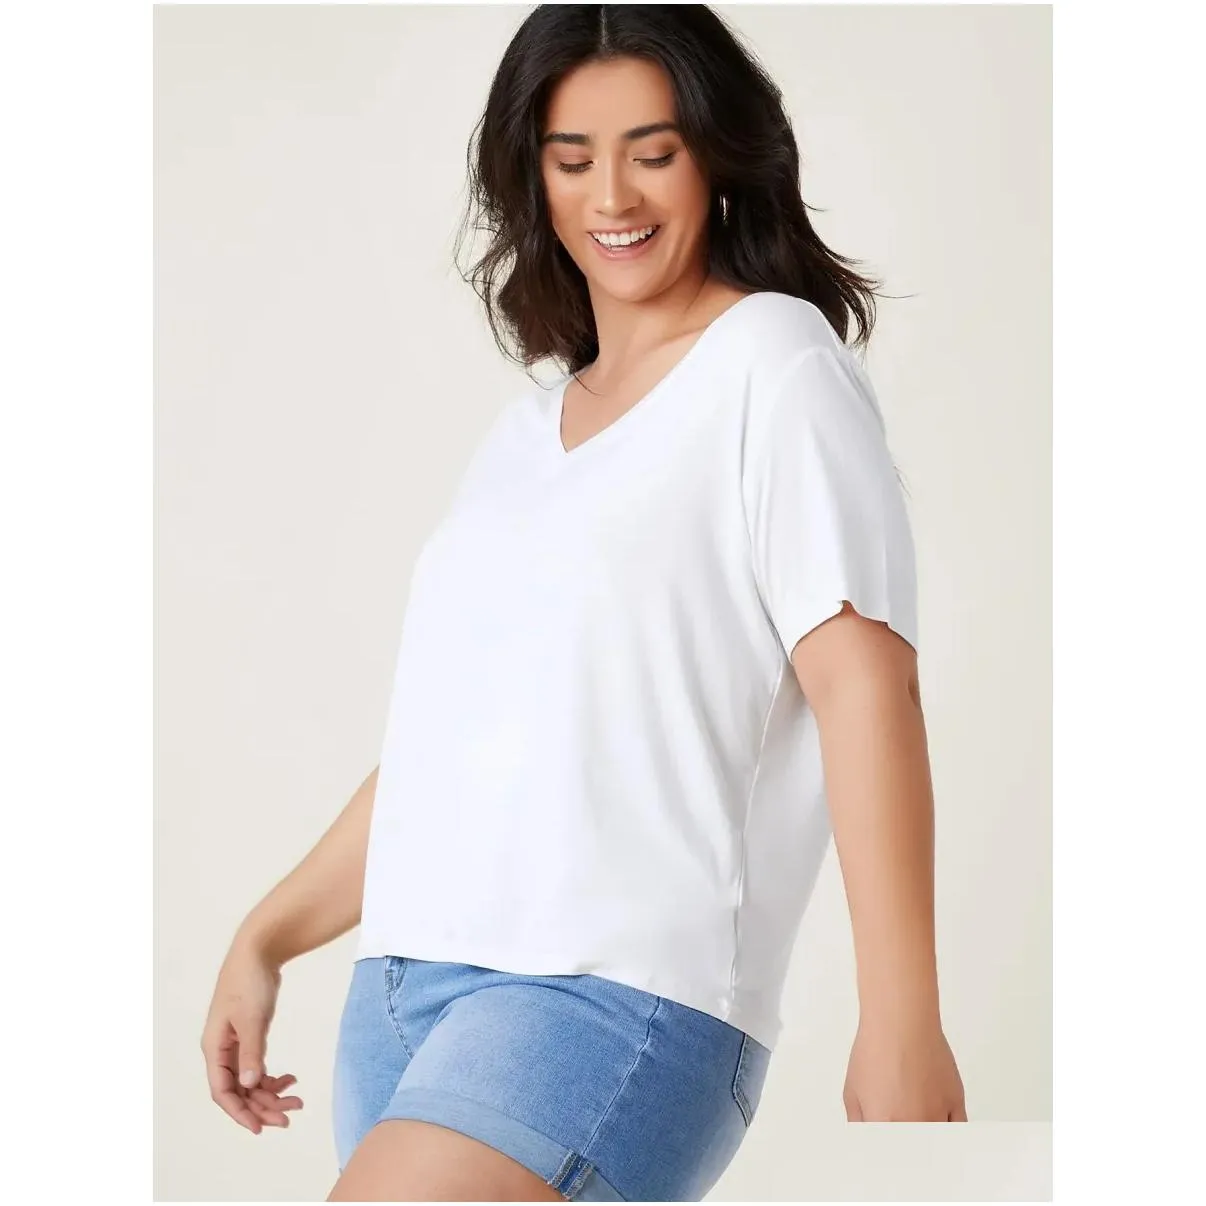 plus Size Short Sleeve Summer Easy Comfort Tops Tunic Women Jersey Relaxed-Fit V-Neck Lgline T-Shirt Big Size Blouse 5XL 6XL m1wT#